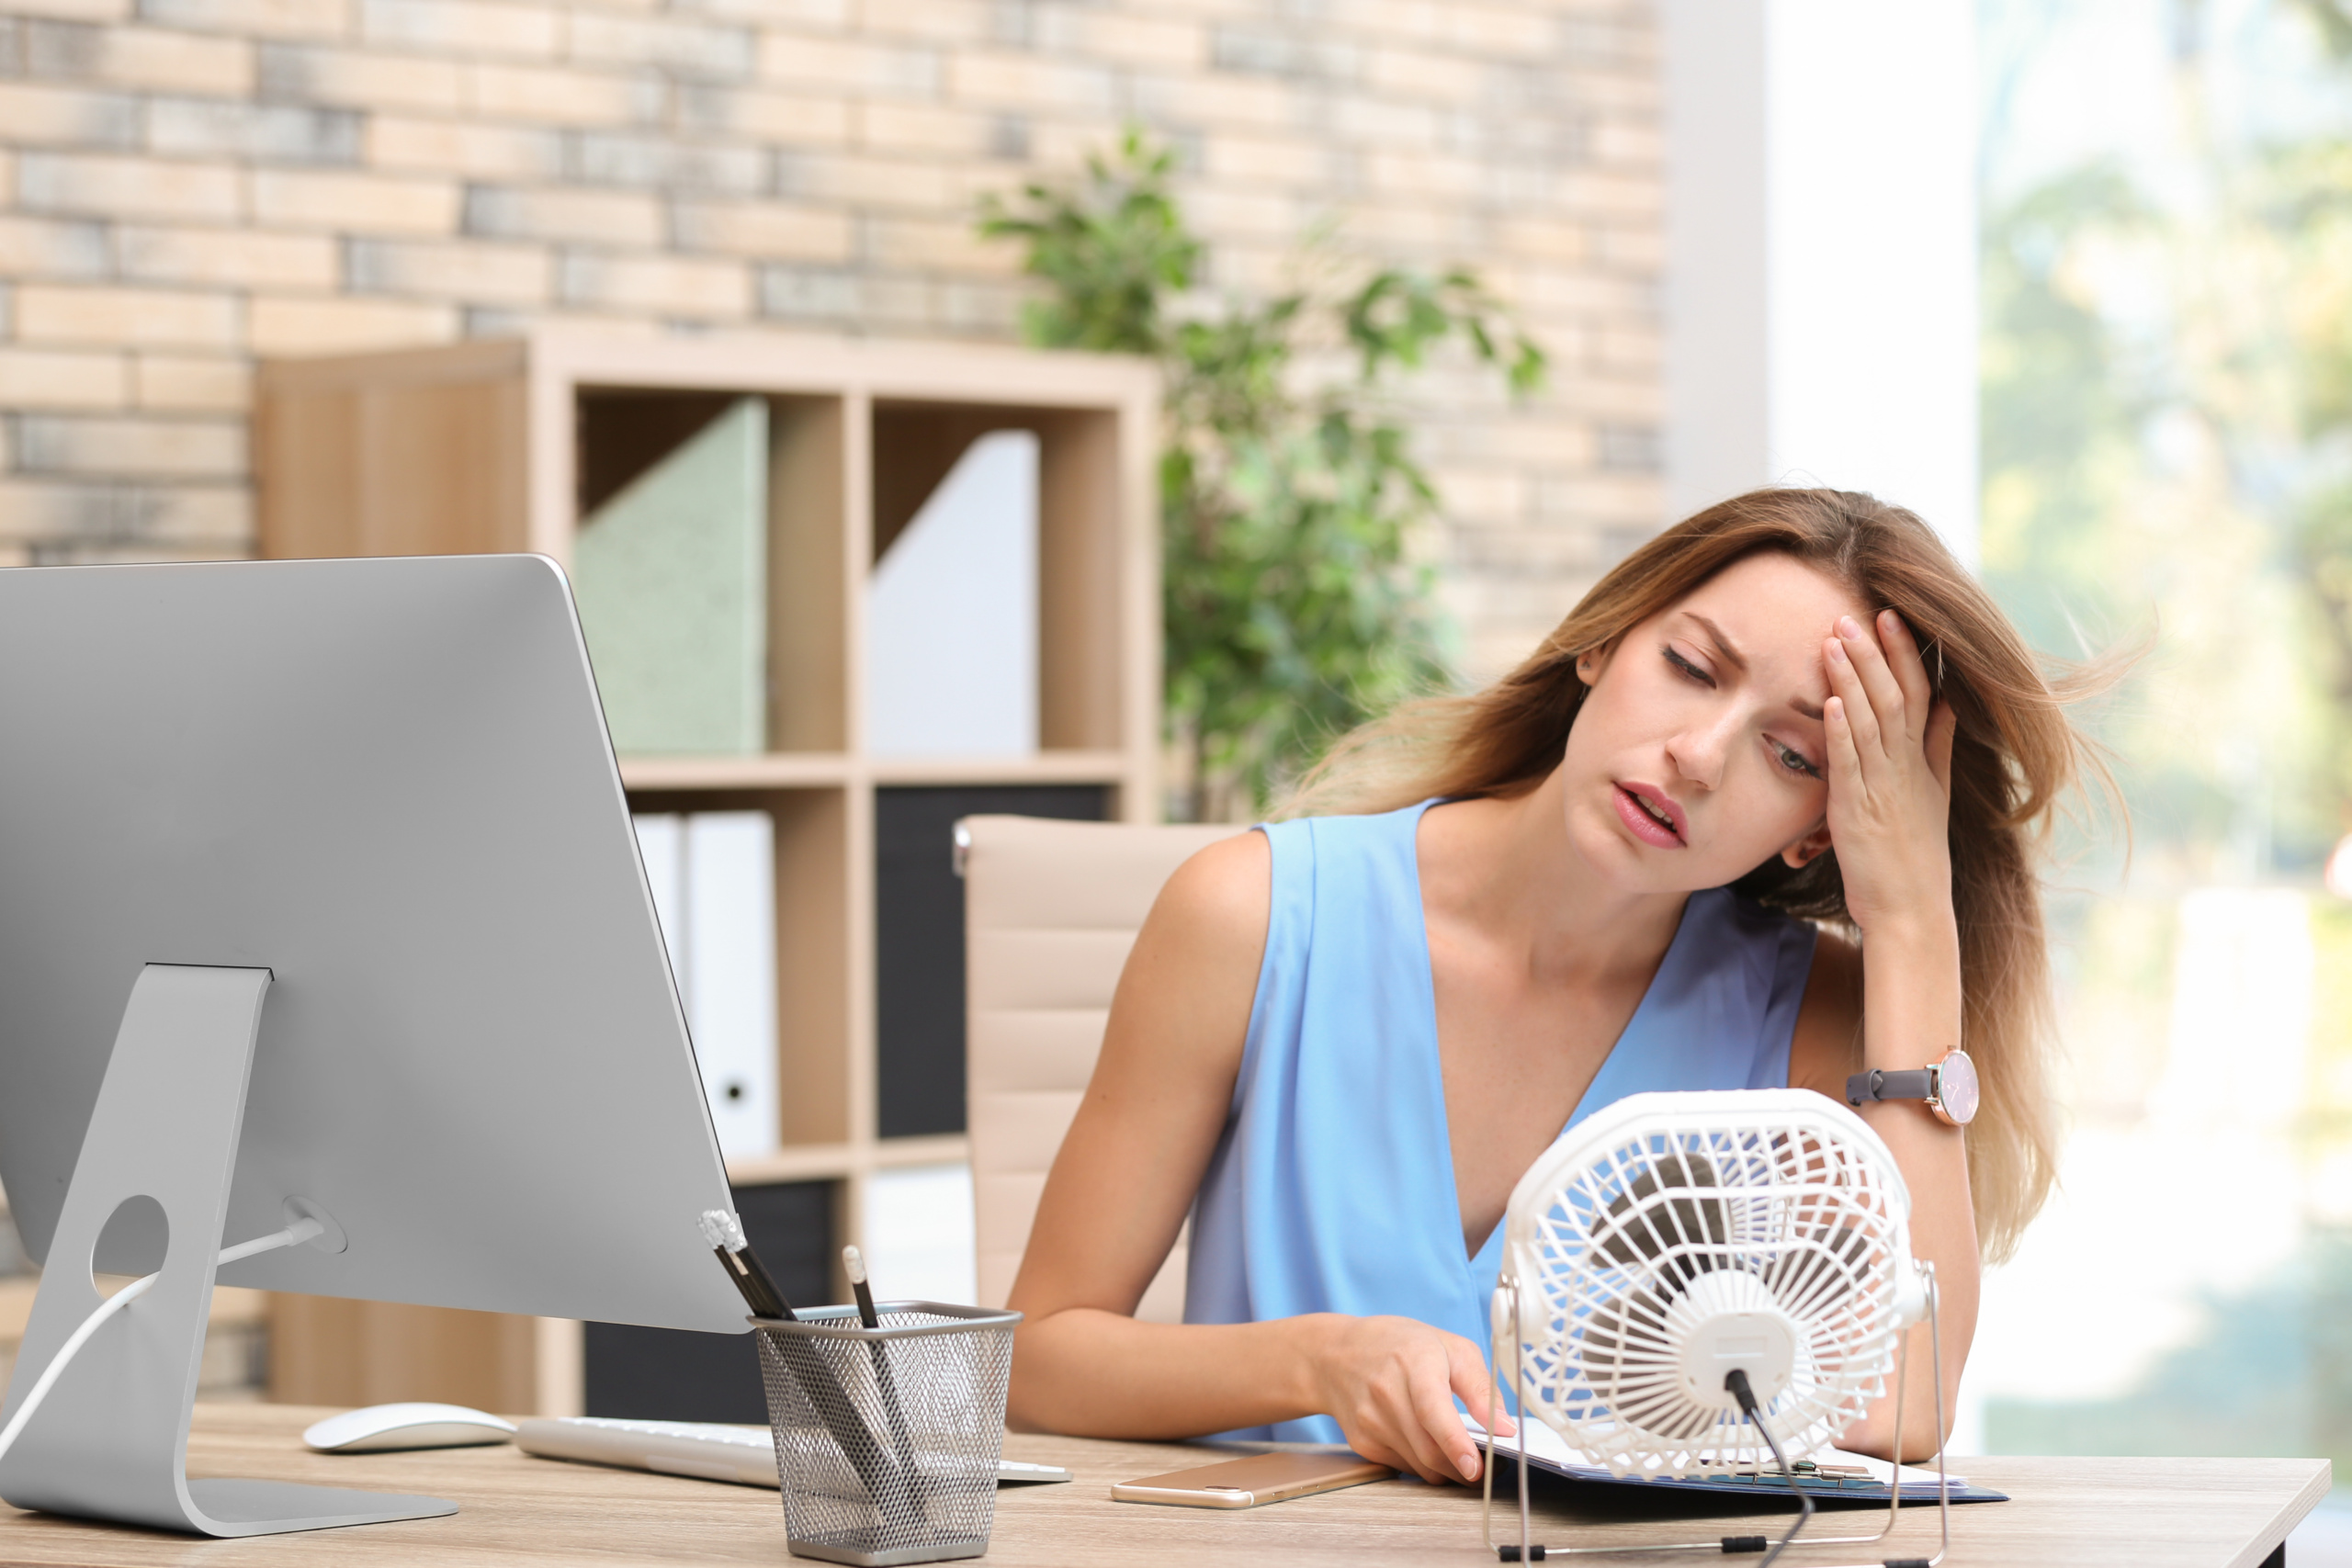 A lady uses a fan in a warm office. How how is too hot to work?